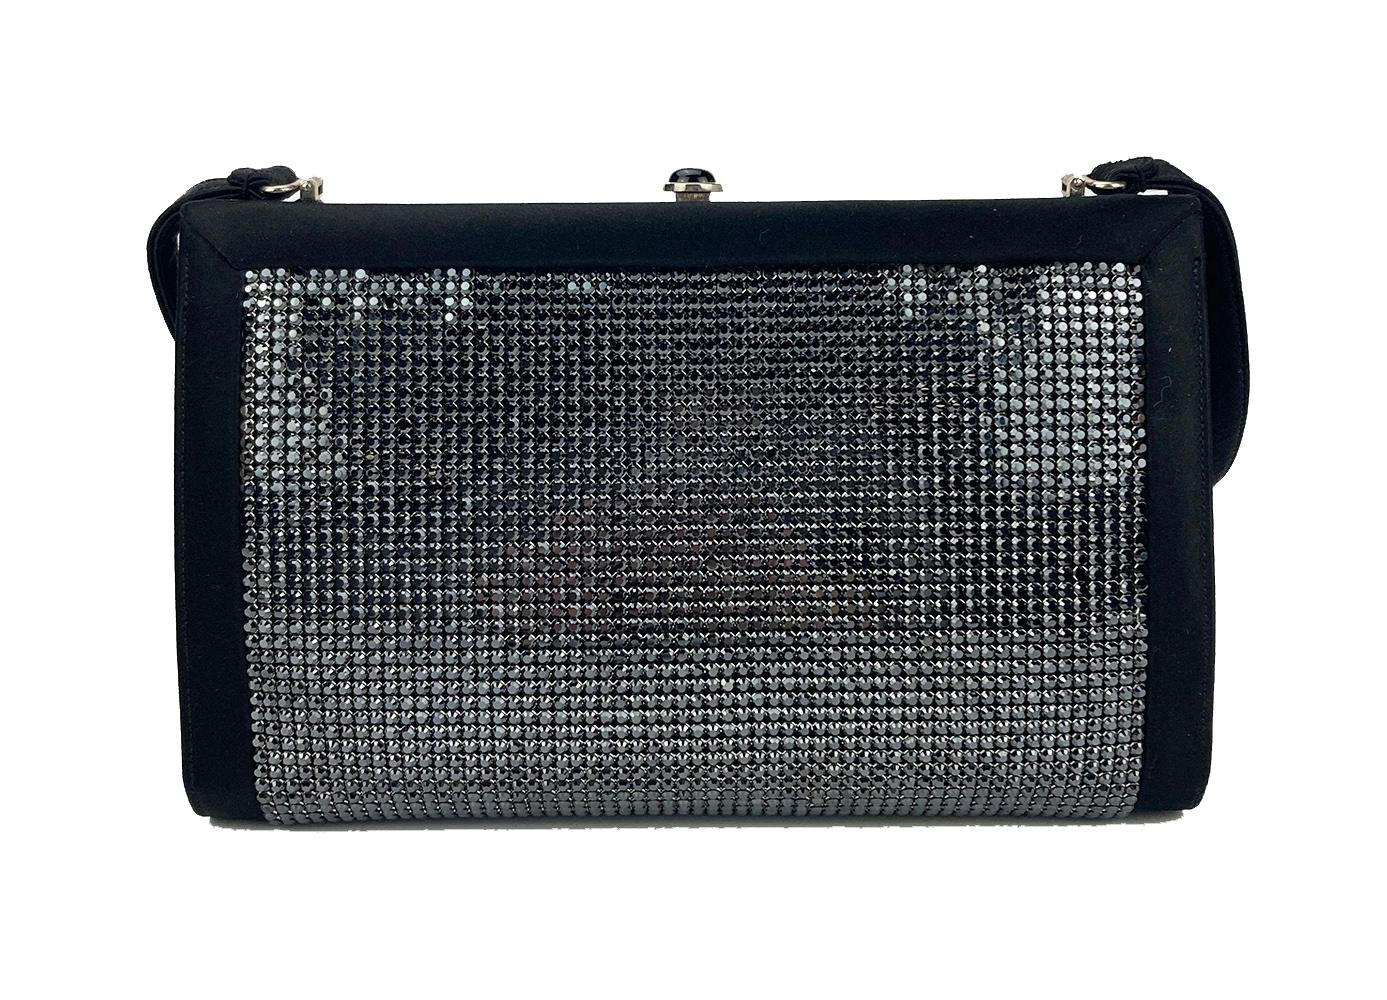 Judith Leiber Black Silk Black Rhinestone Evening Bag in excellent condition. Black silk exterior trimmed with sparkling black rhinestone body, silver hardware and black silk shoulder strap. Top button hinge closure opens to a matching black silk